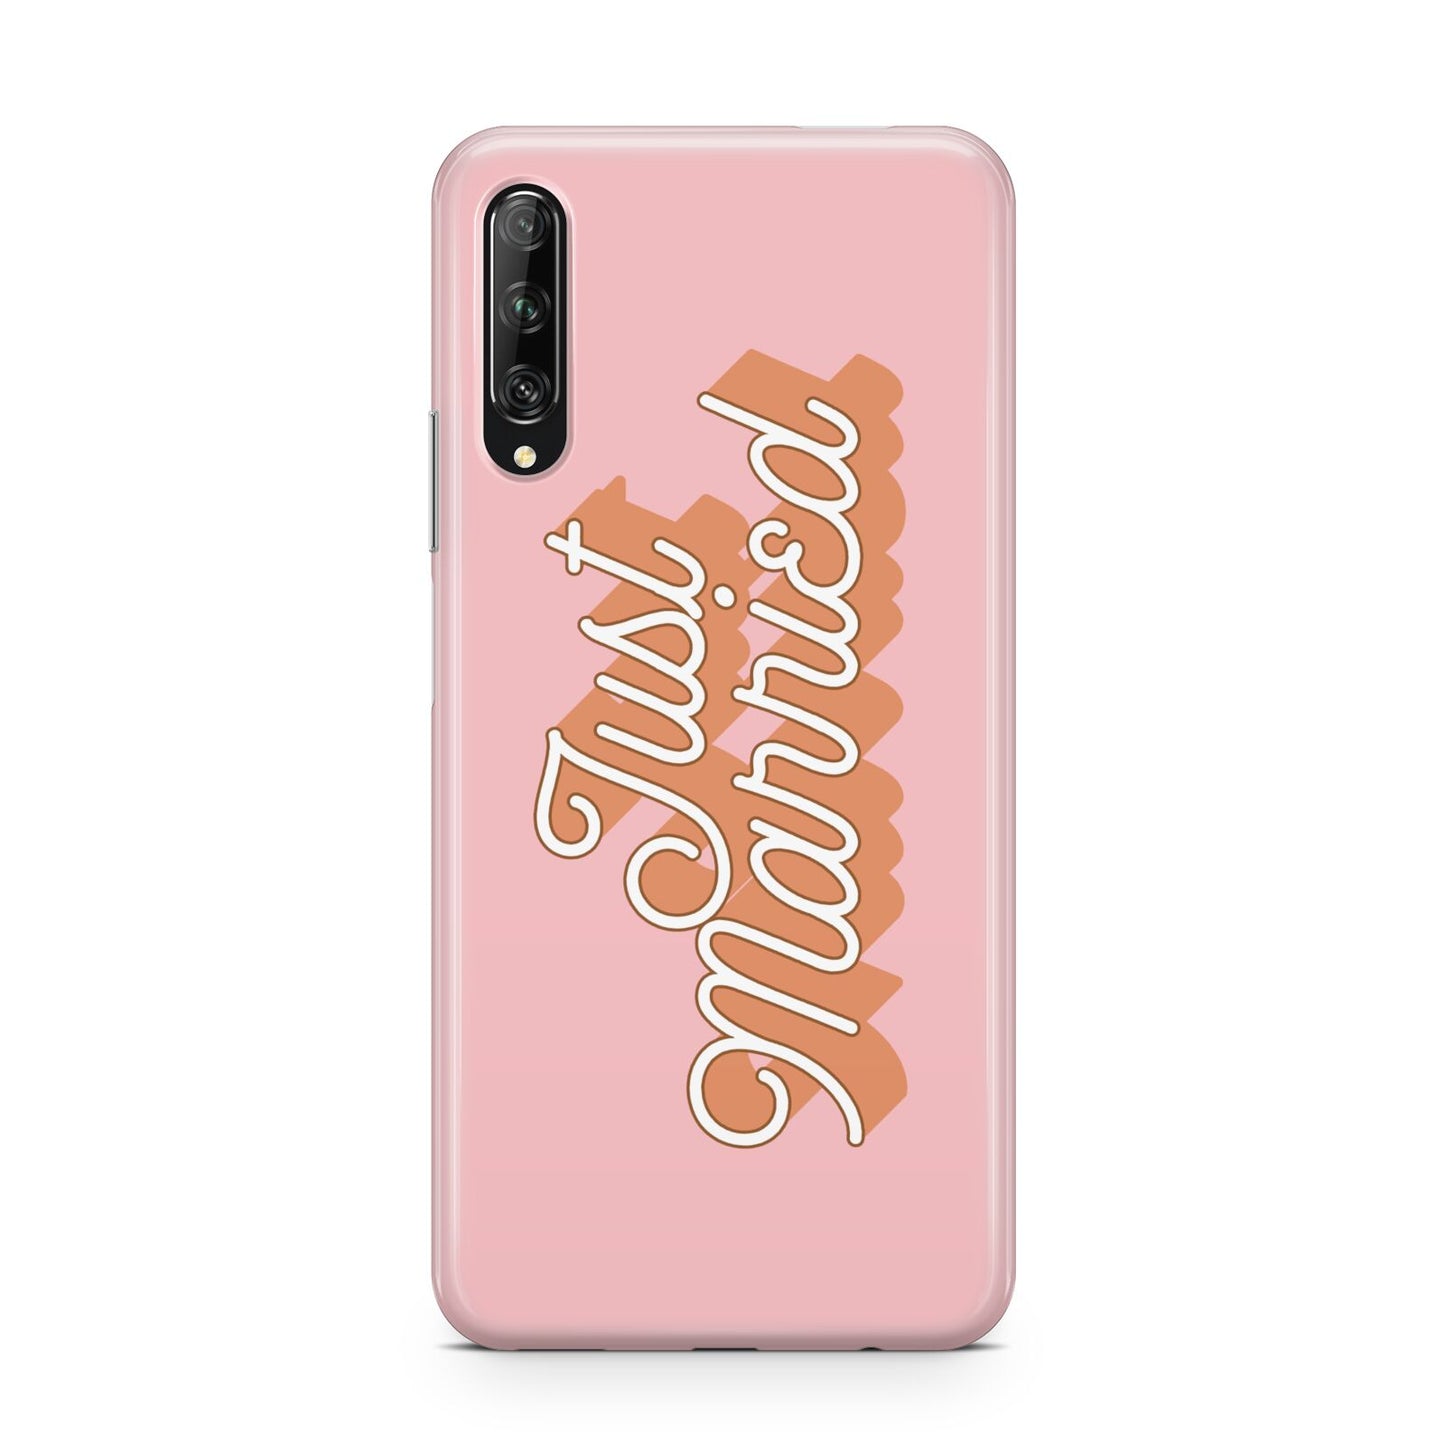 Just Married Pink Huawei P Smart Pro 2019